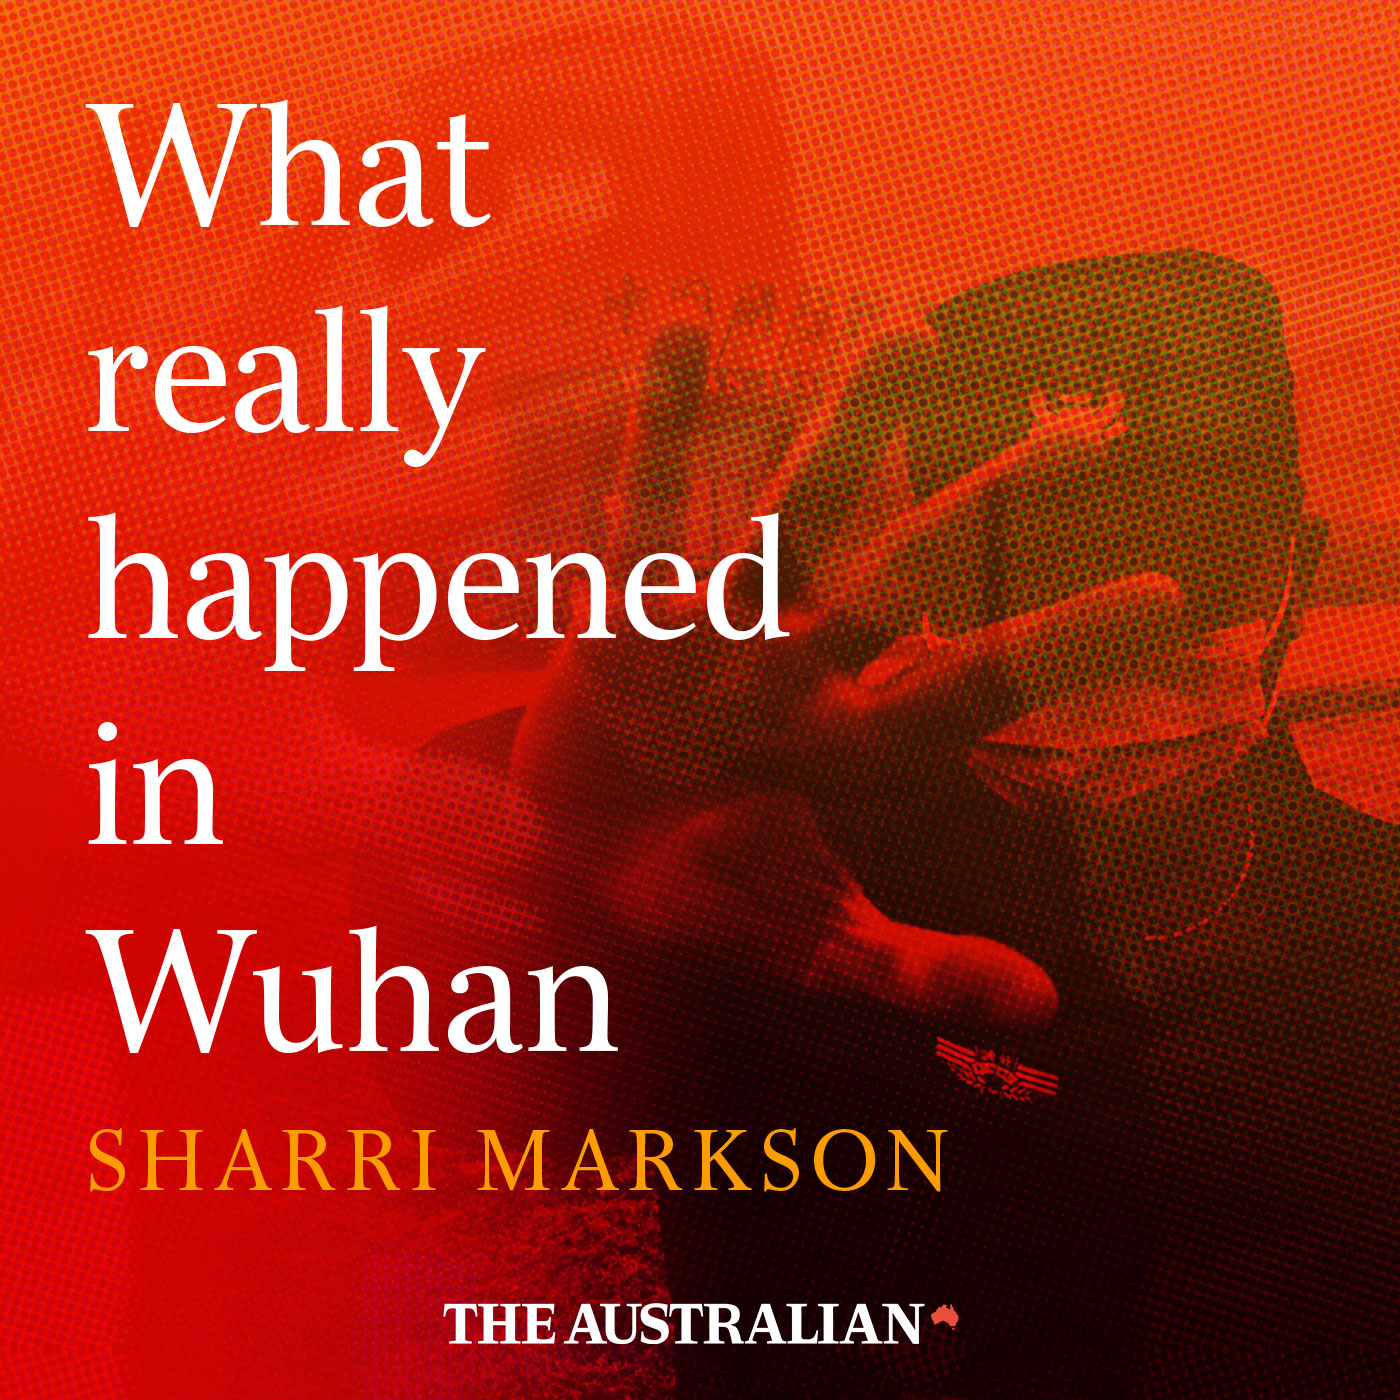 Introducing: What Really Happened in Wuhan